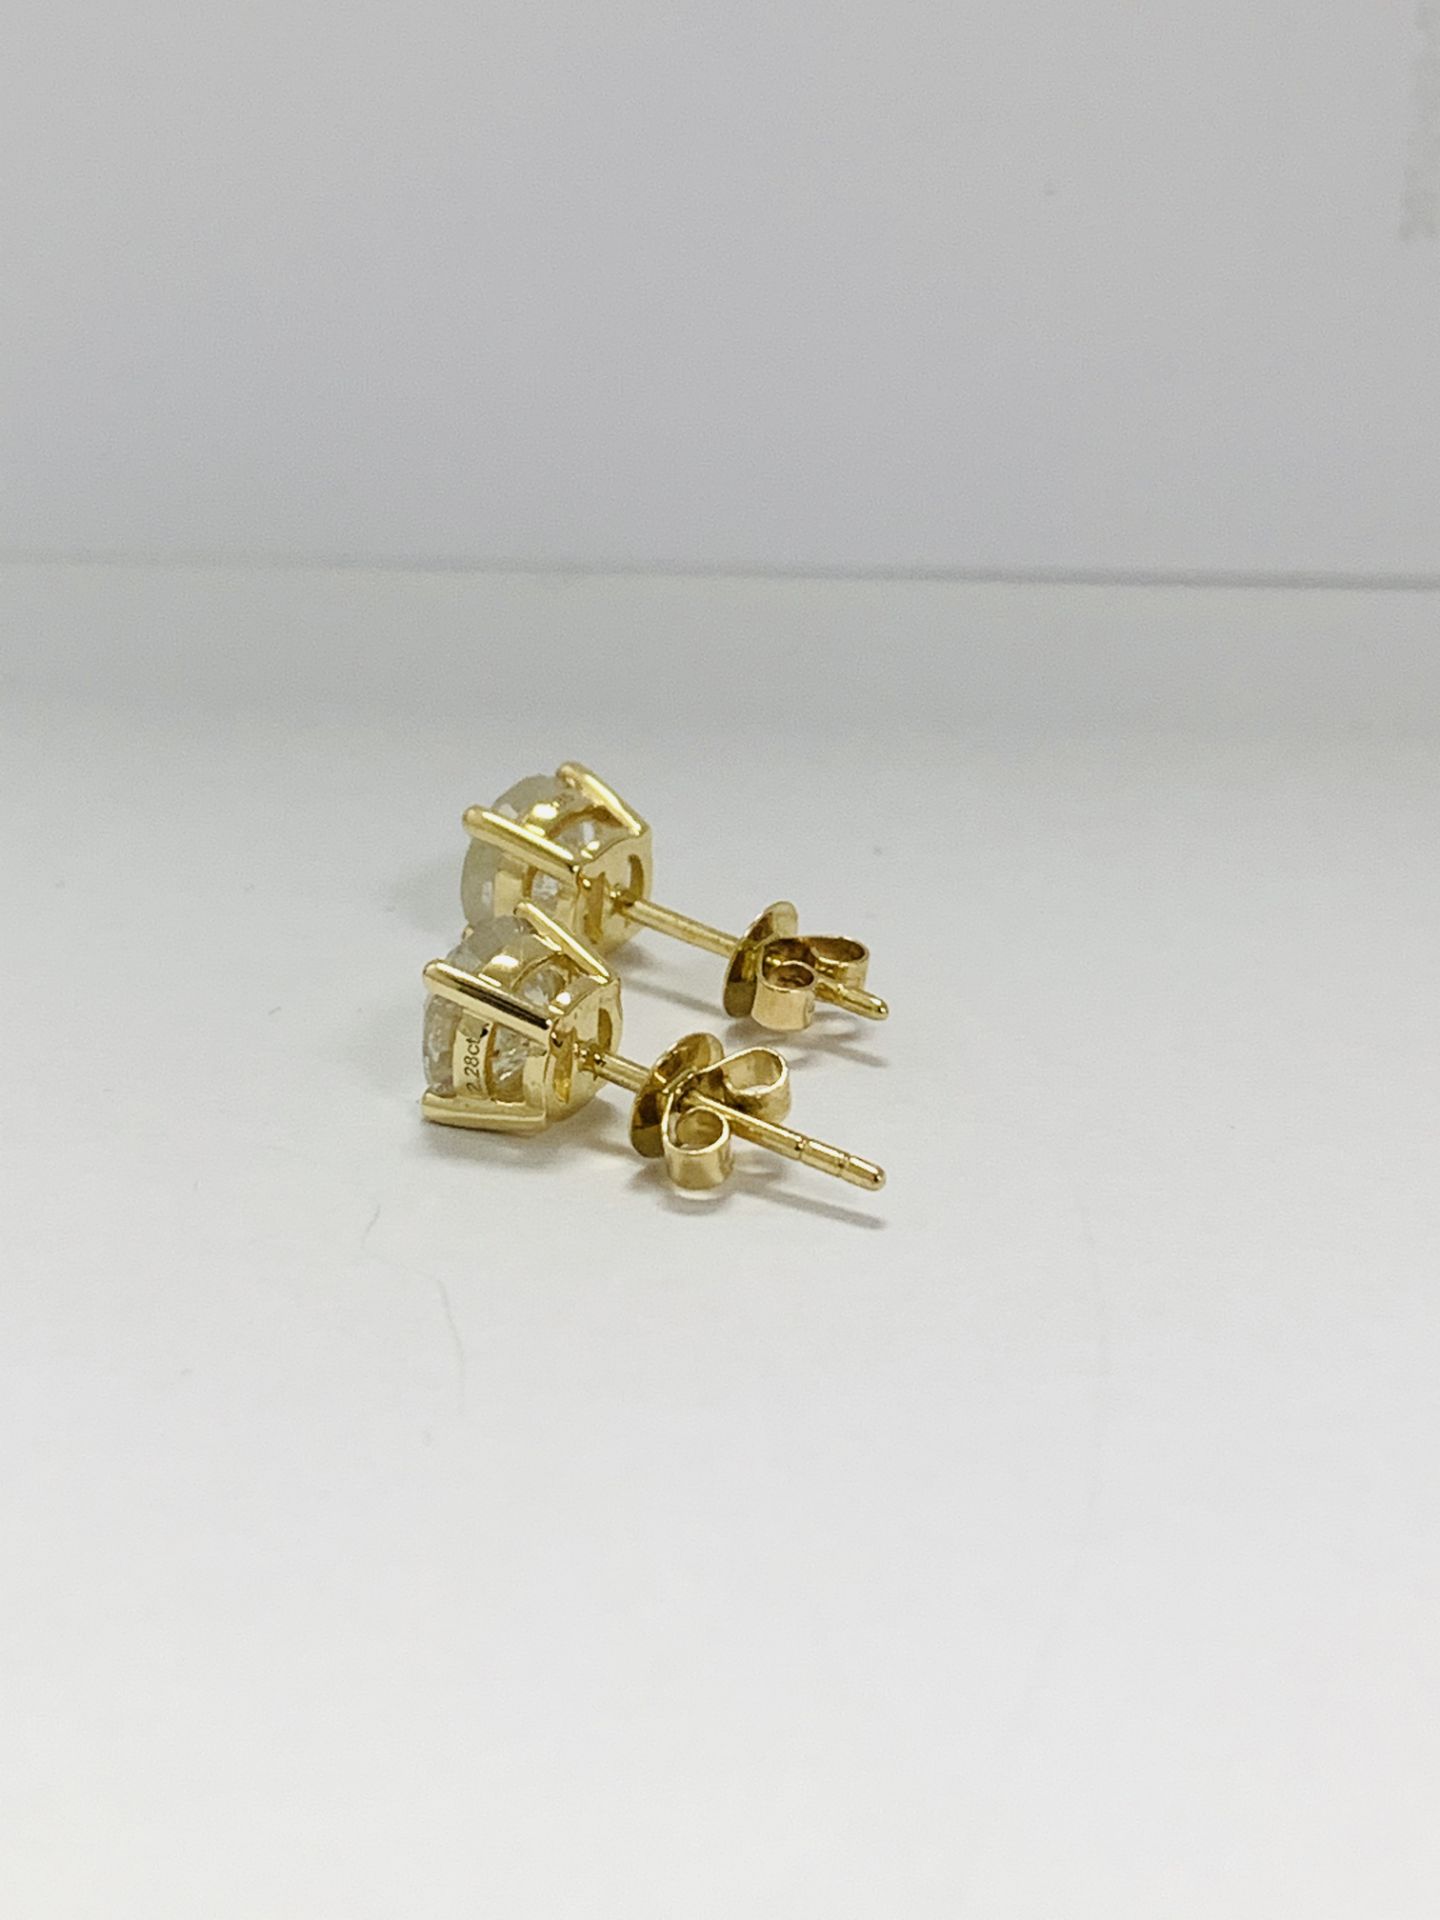 14Ct Yellow Gold Pair Of Earrings - Image 3 of 9